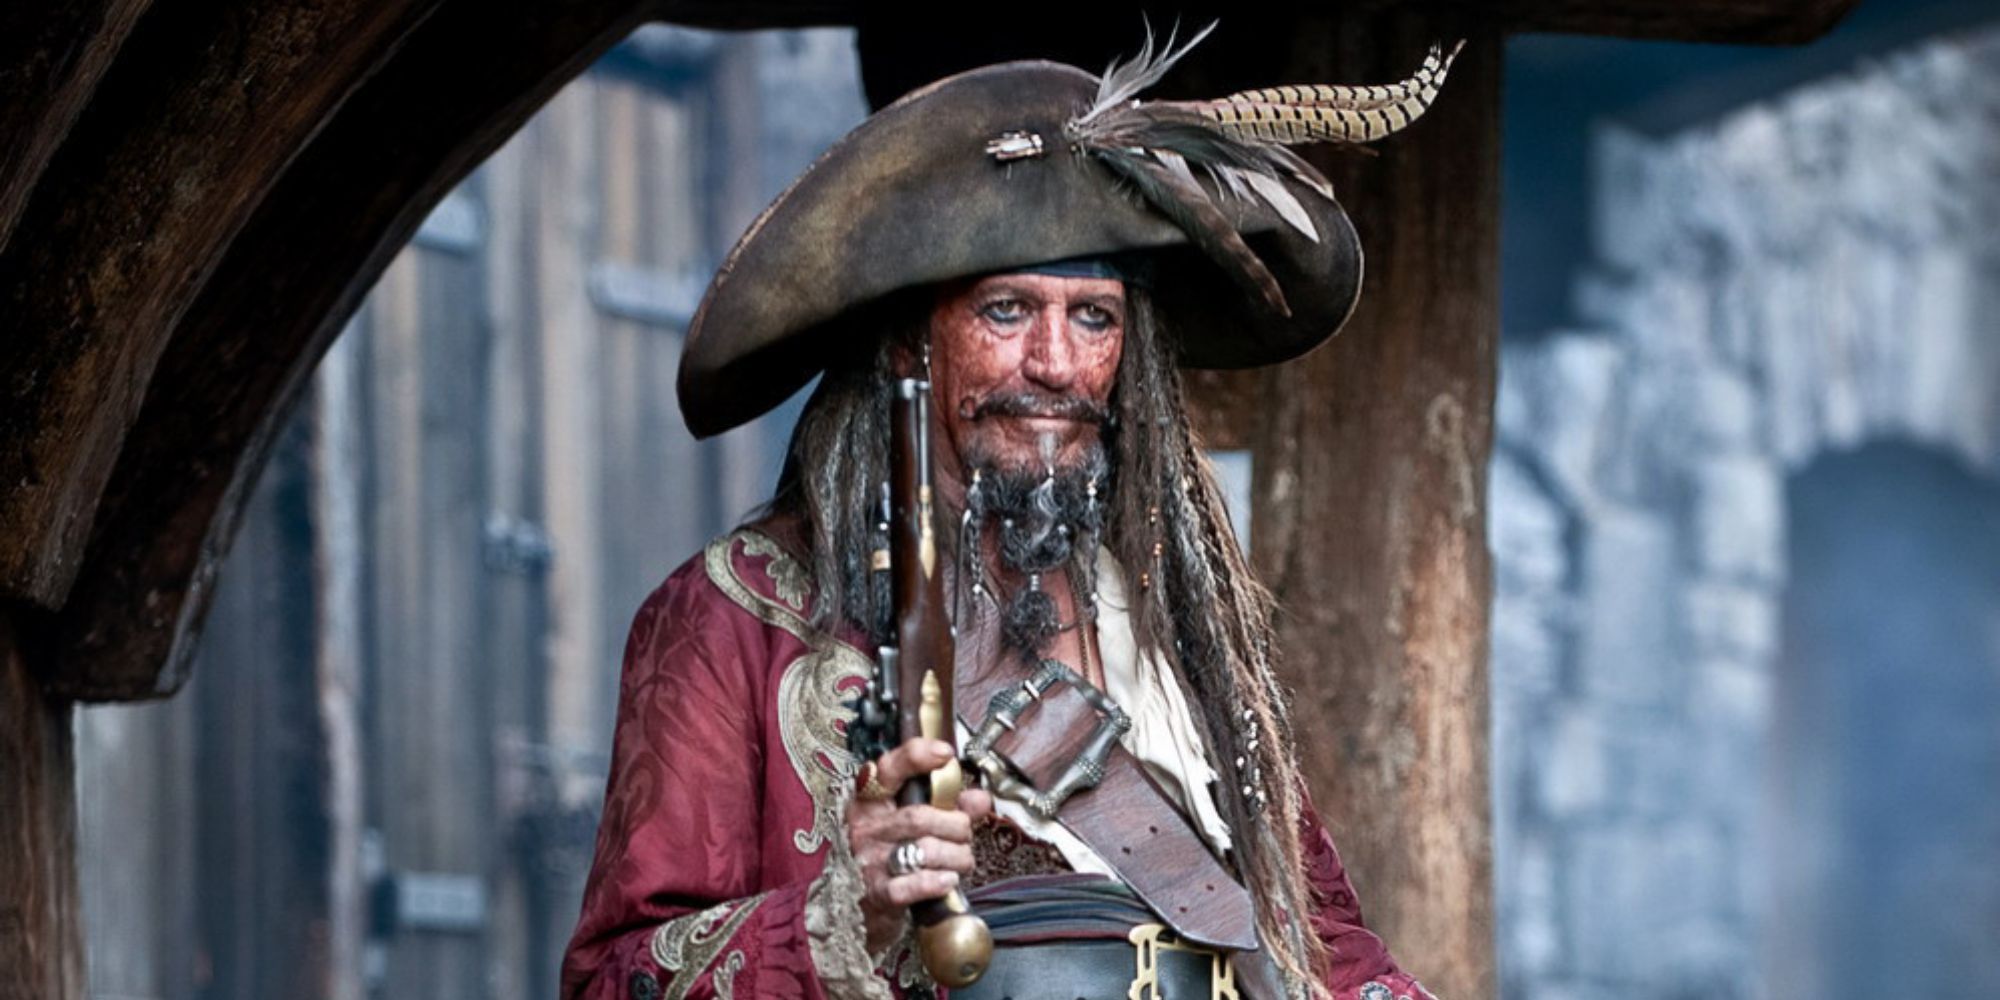 The Little-Known Story Of Captain Jack Sparrow's Origin